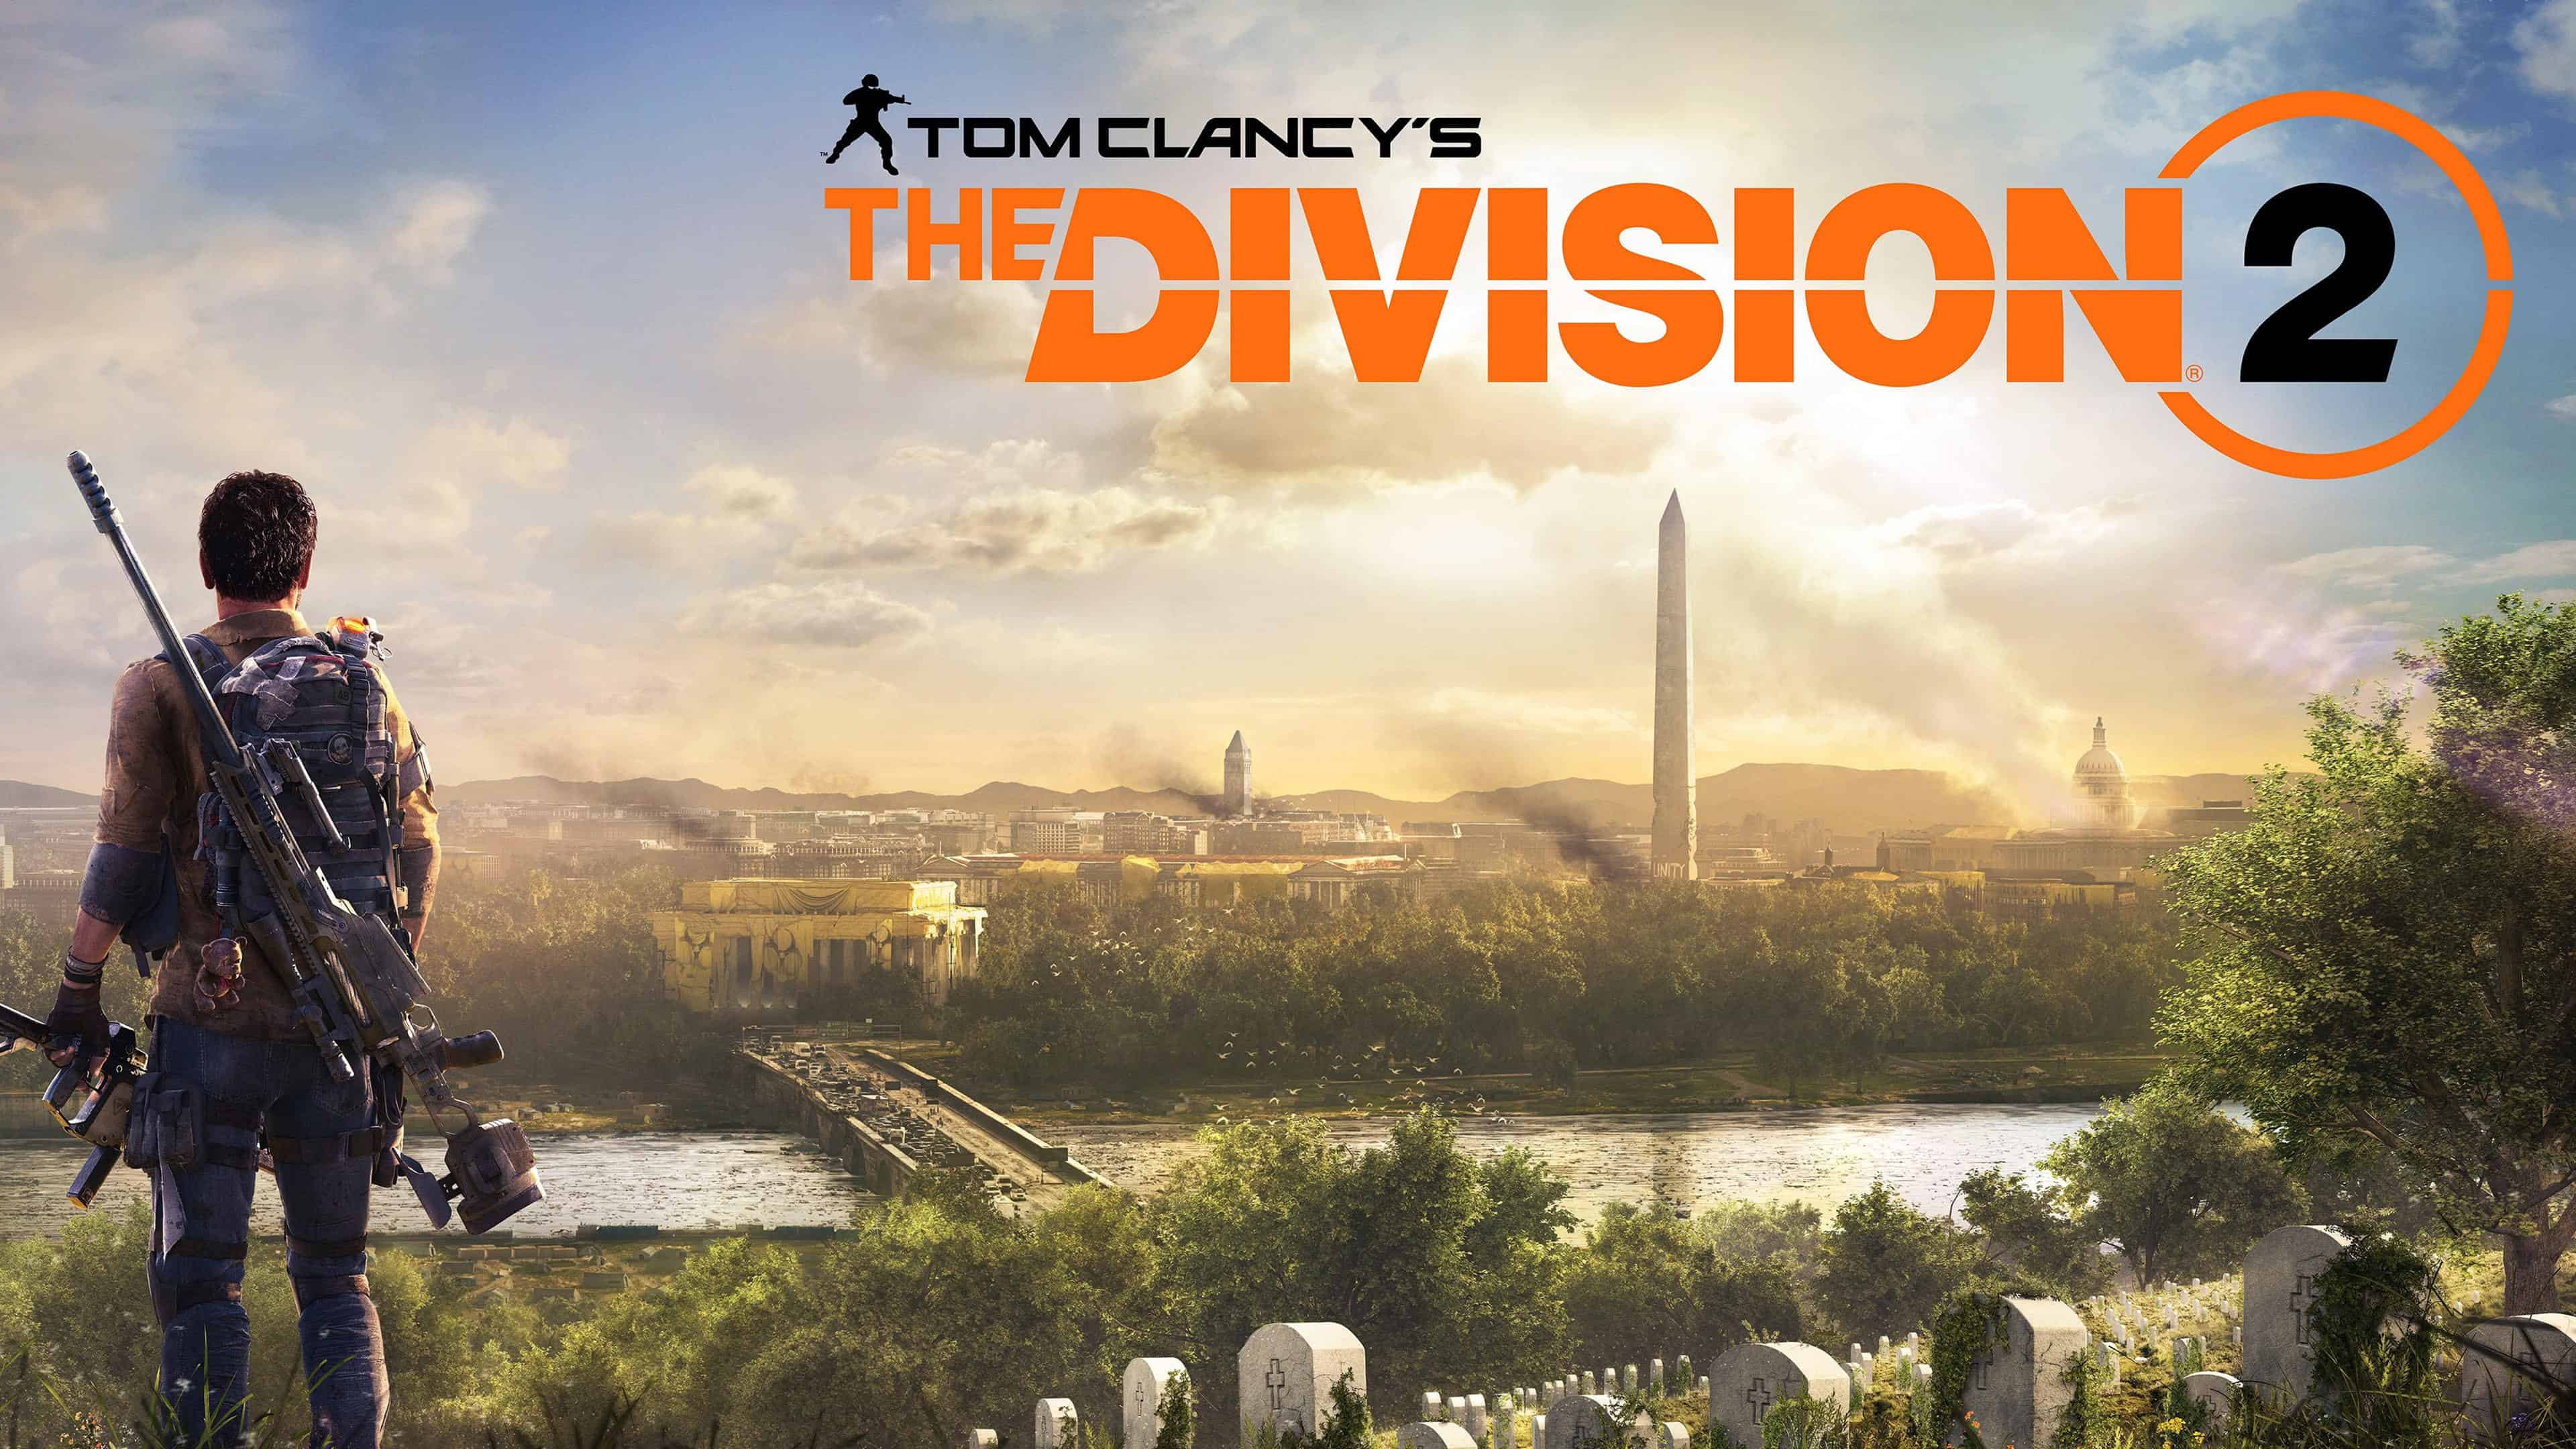 Tom Clancy The Division 2 Poster UHD 4K Wallpaper